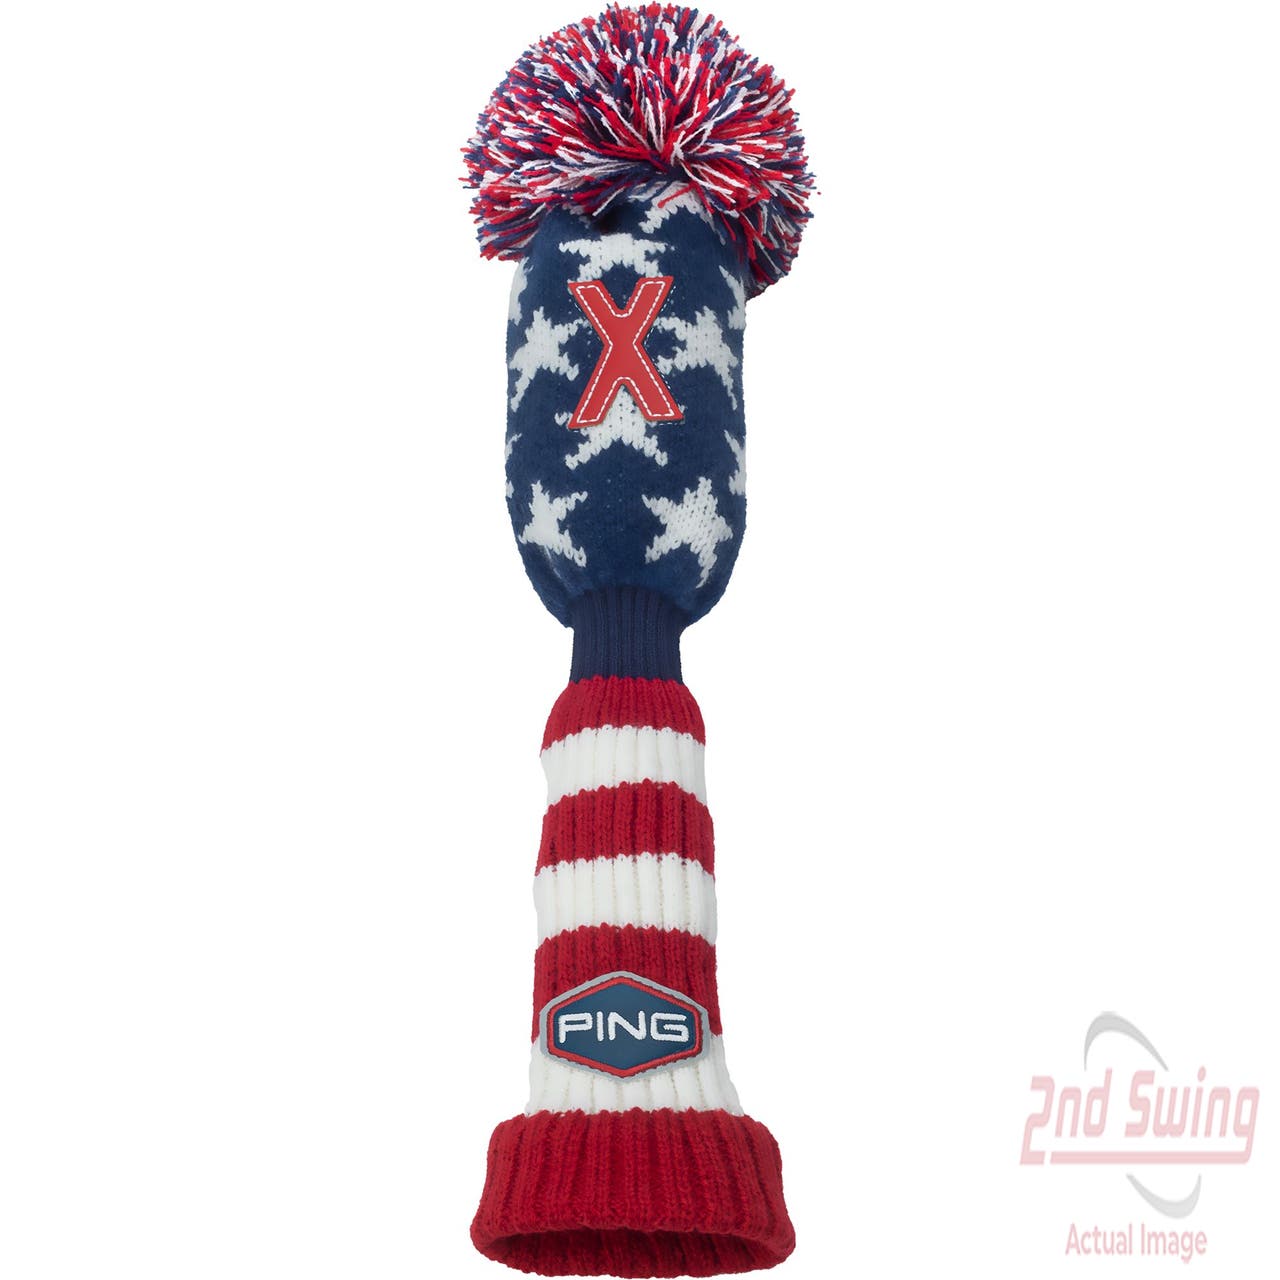 New Ping 2022 Liberty Knit Hybrid Headcover